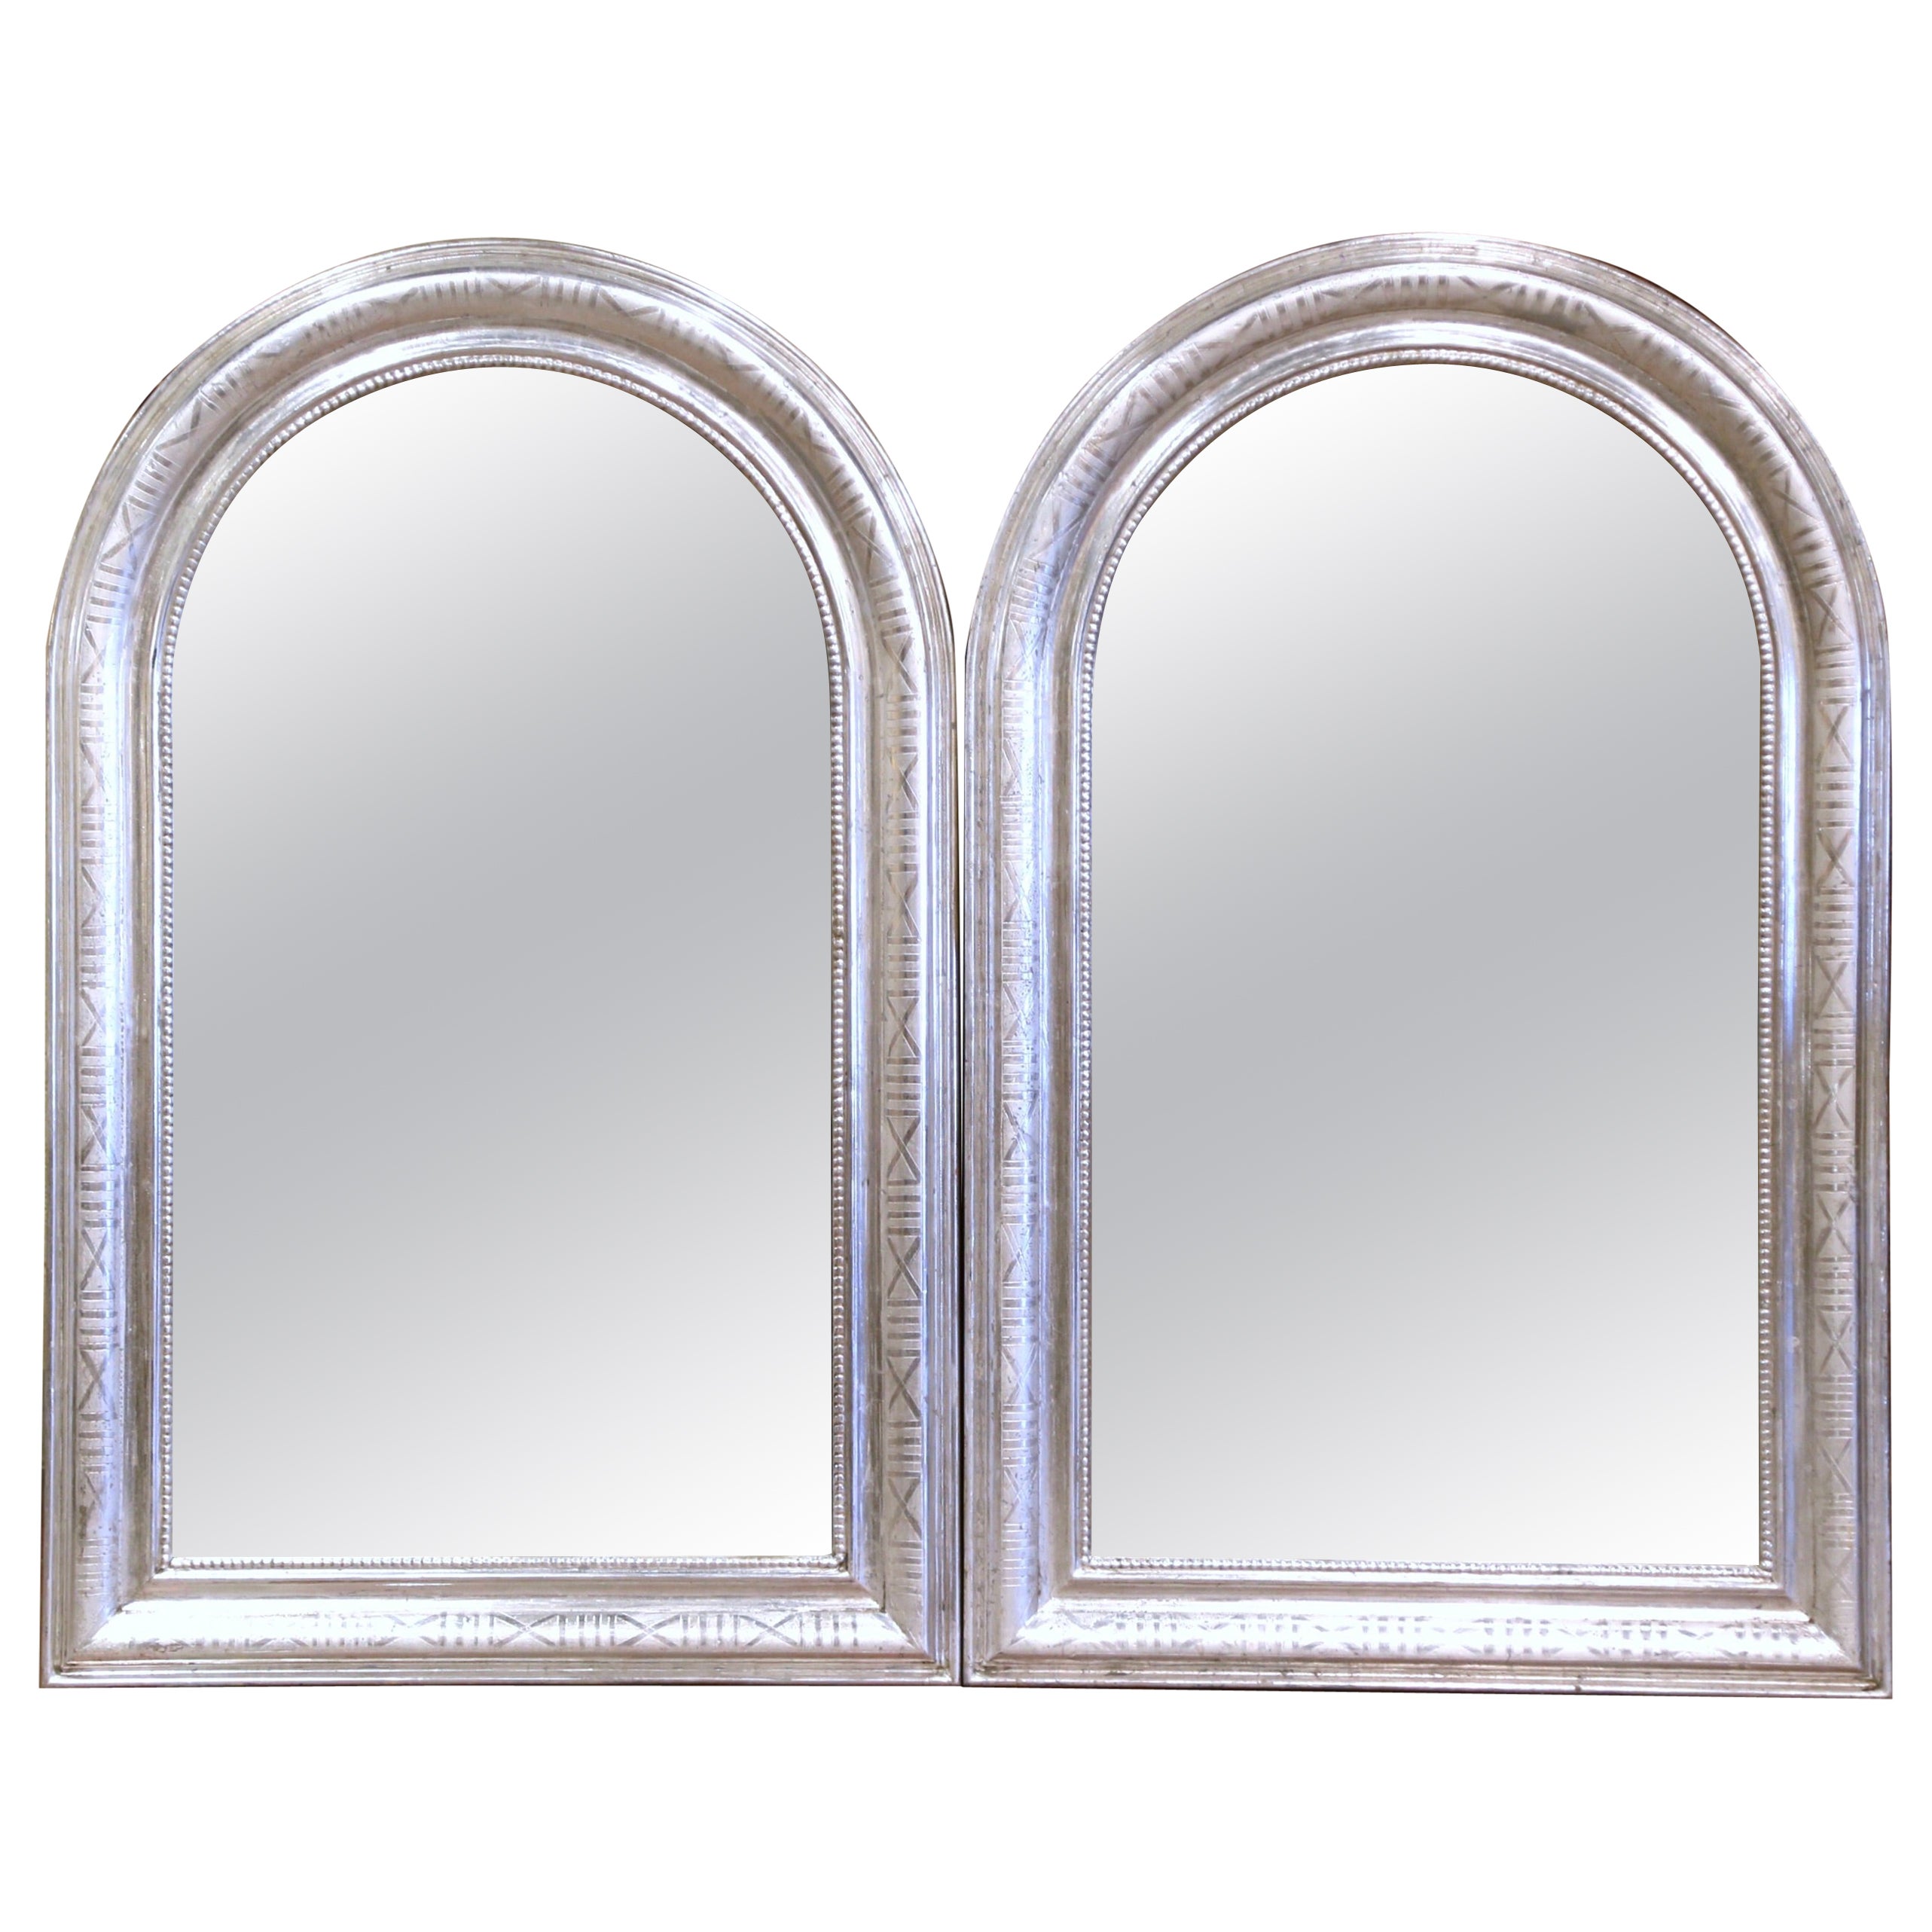  Pair of French Louis Philippe Silver Leaf Wall Mirrors with Engraved Motifs